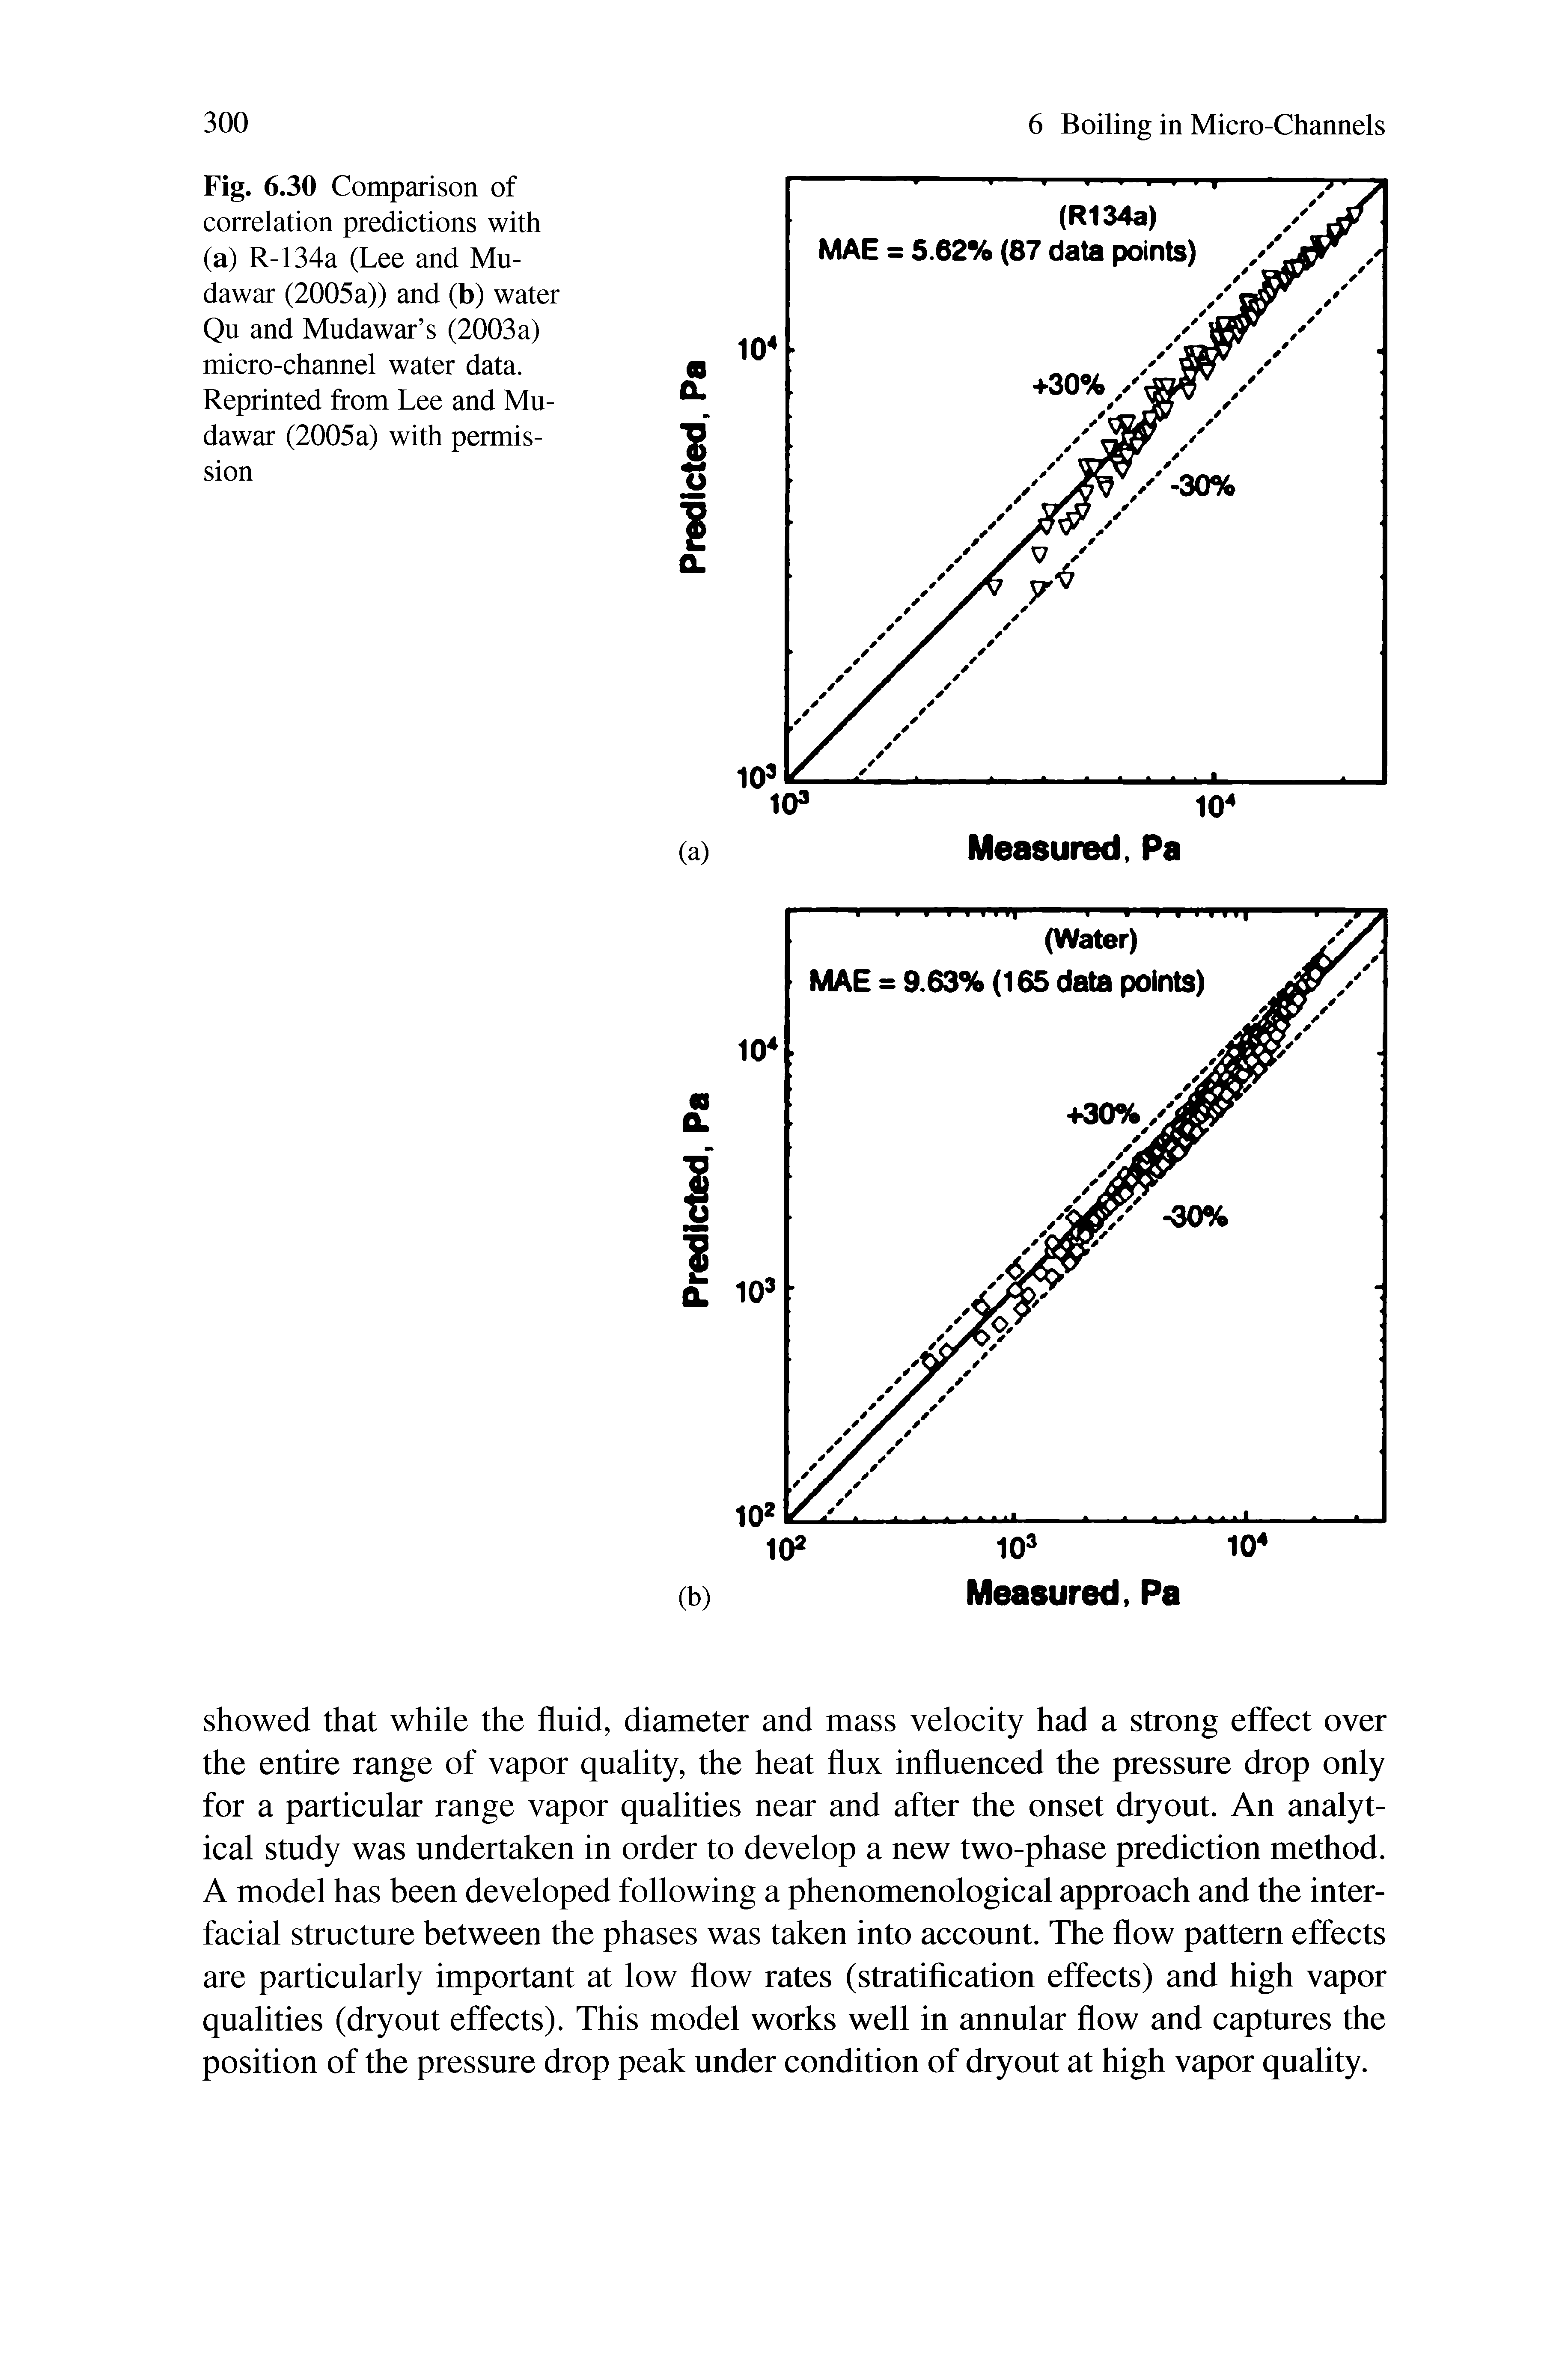 Fig. 6.30 Comparison of correlation predictions with (a) R-134a (Lee and Mu-dawar (2005a)) and (b) water Qu and Mudawar s (2003a) micro-channel water data. Reprinted from Lee and Mu-dawar (2005a) with permission...